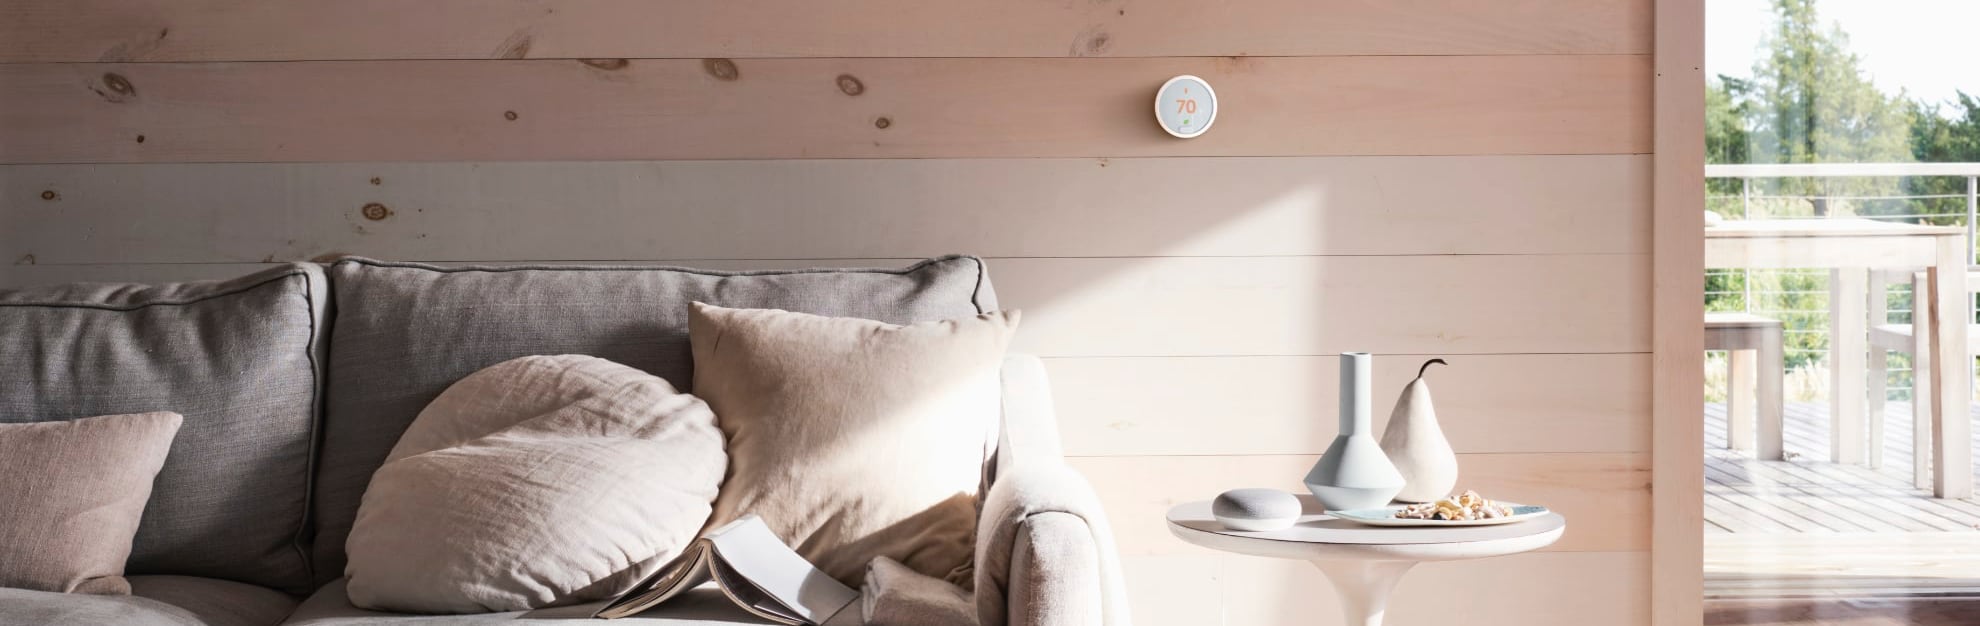 Vivint Home Automation in Lafayette